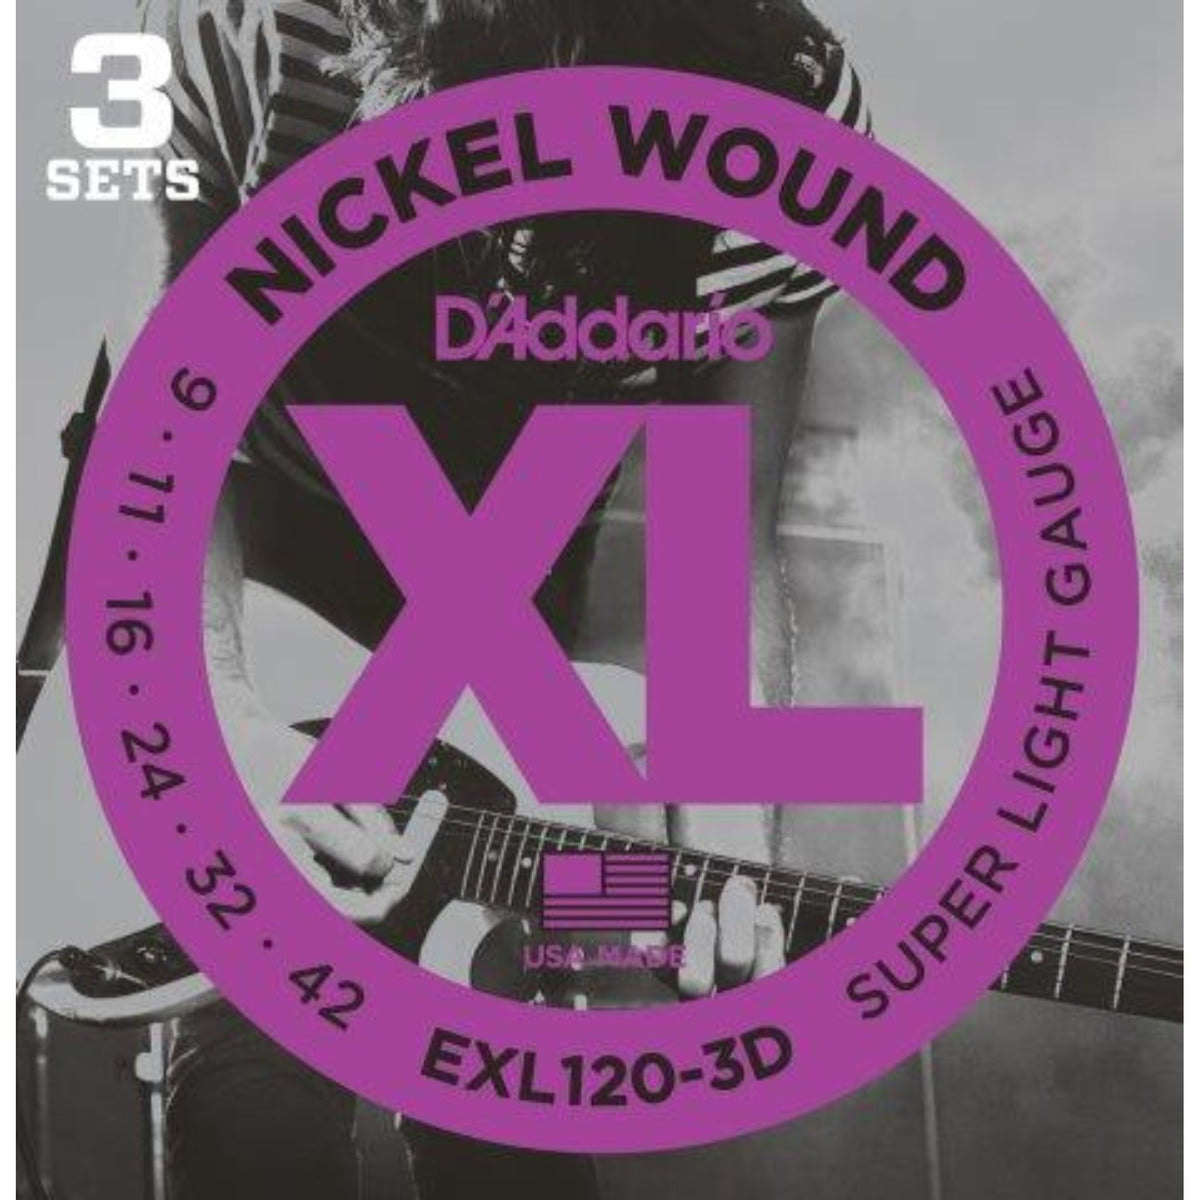 The D&#39;Addario EXL120 Electric Guitar Strings are one of D&#39;Addario&#39;s best selling sets, delivers super flexibility and biting tone.